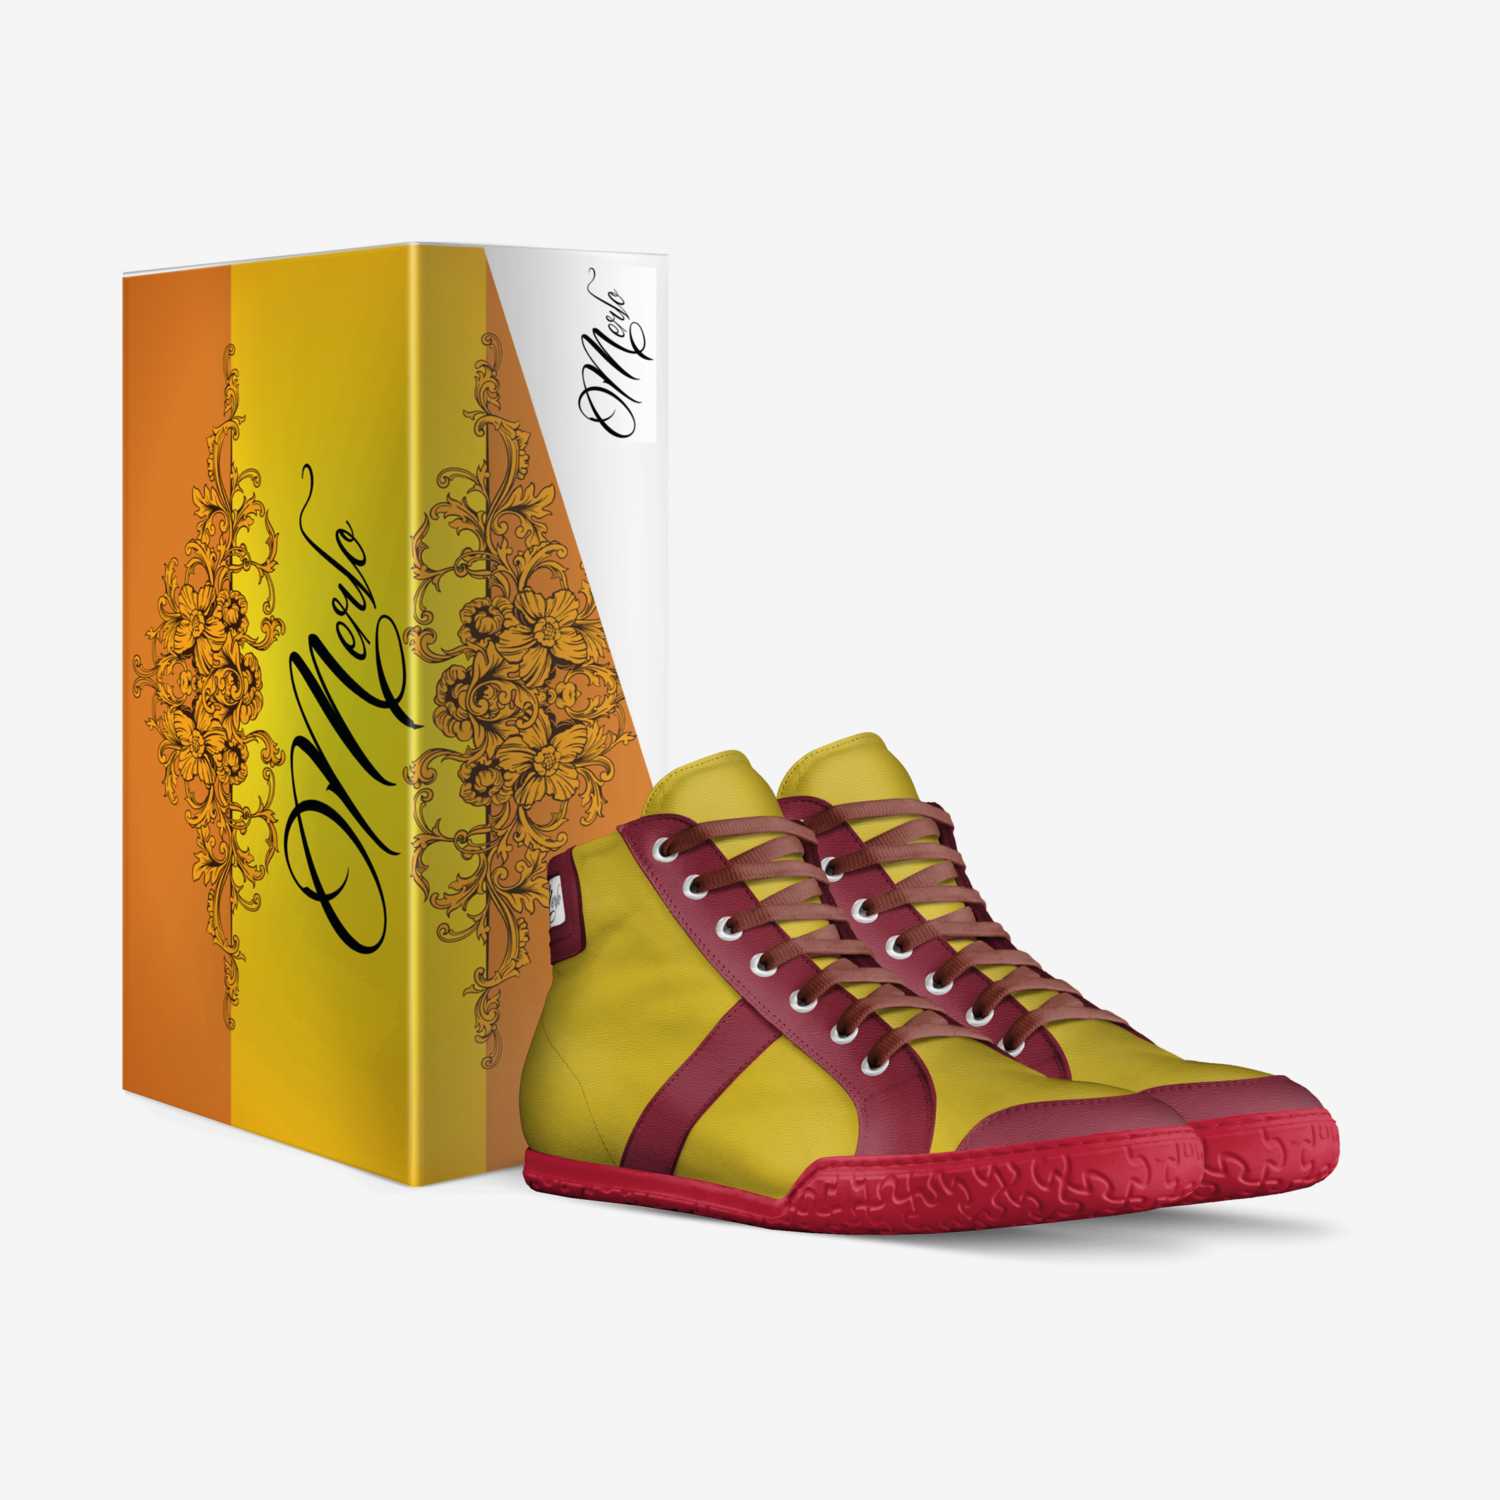 Merlo custom made in Italy shoes by Luis Merlo | Box view